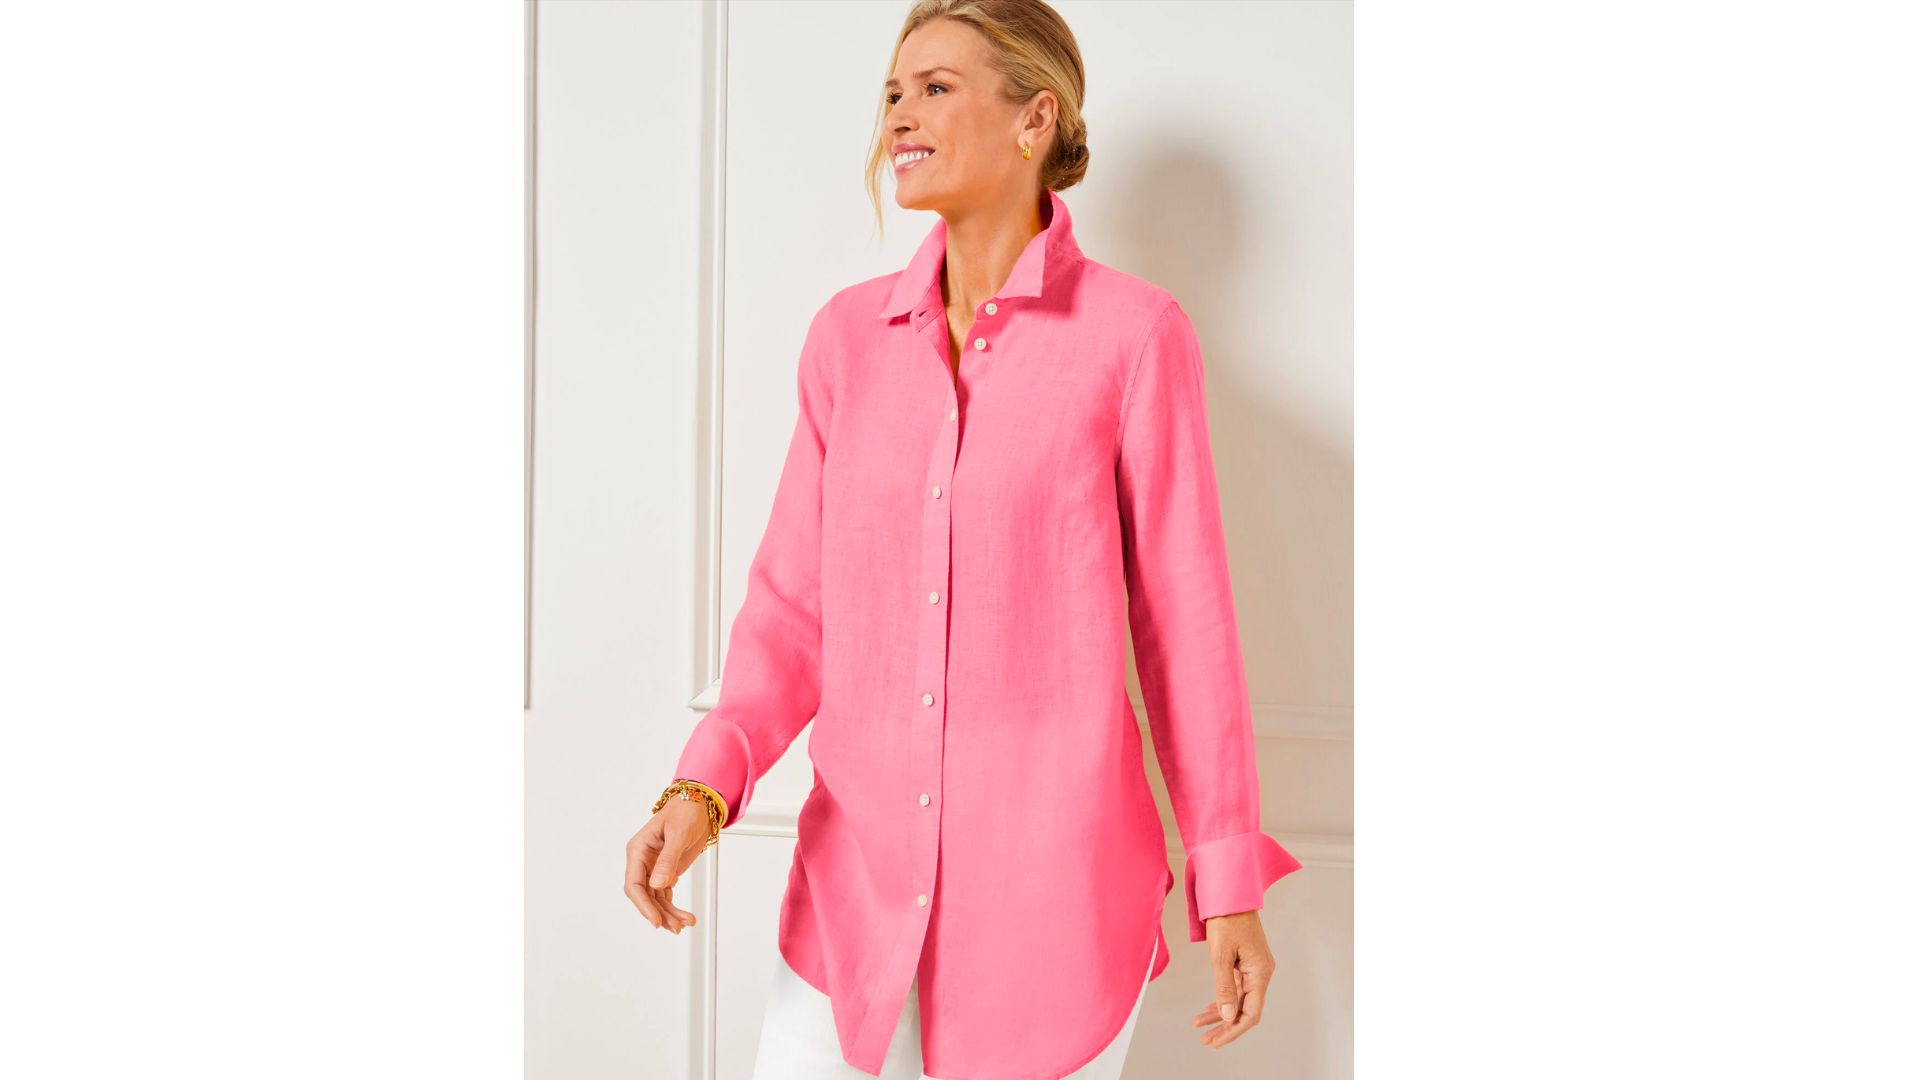 Classic Women's Clothing at Talbots